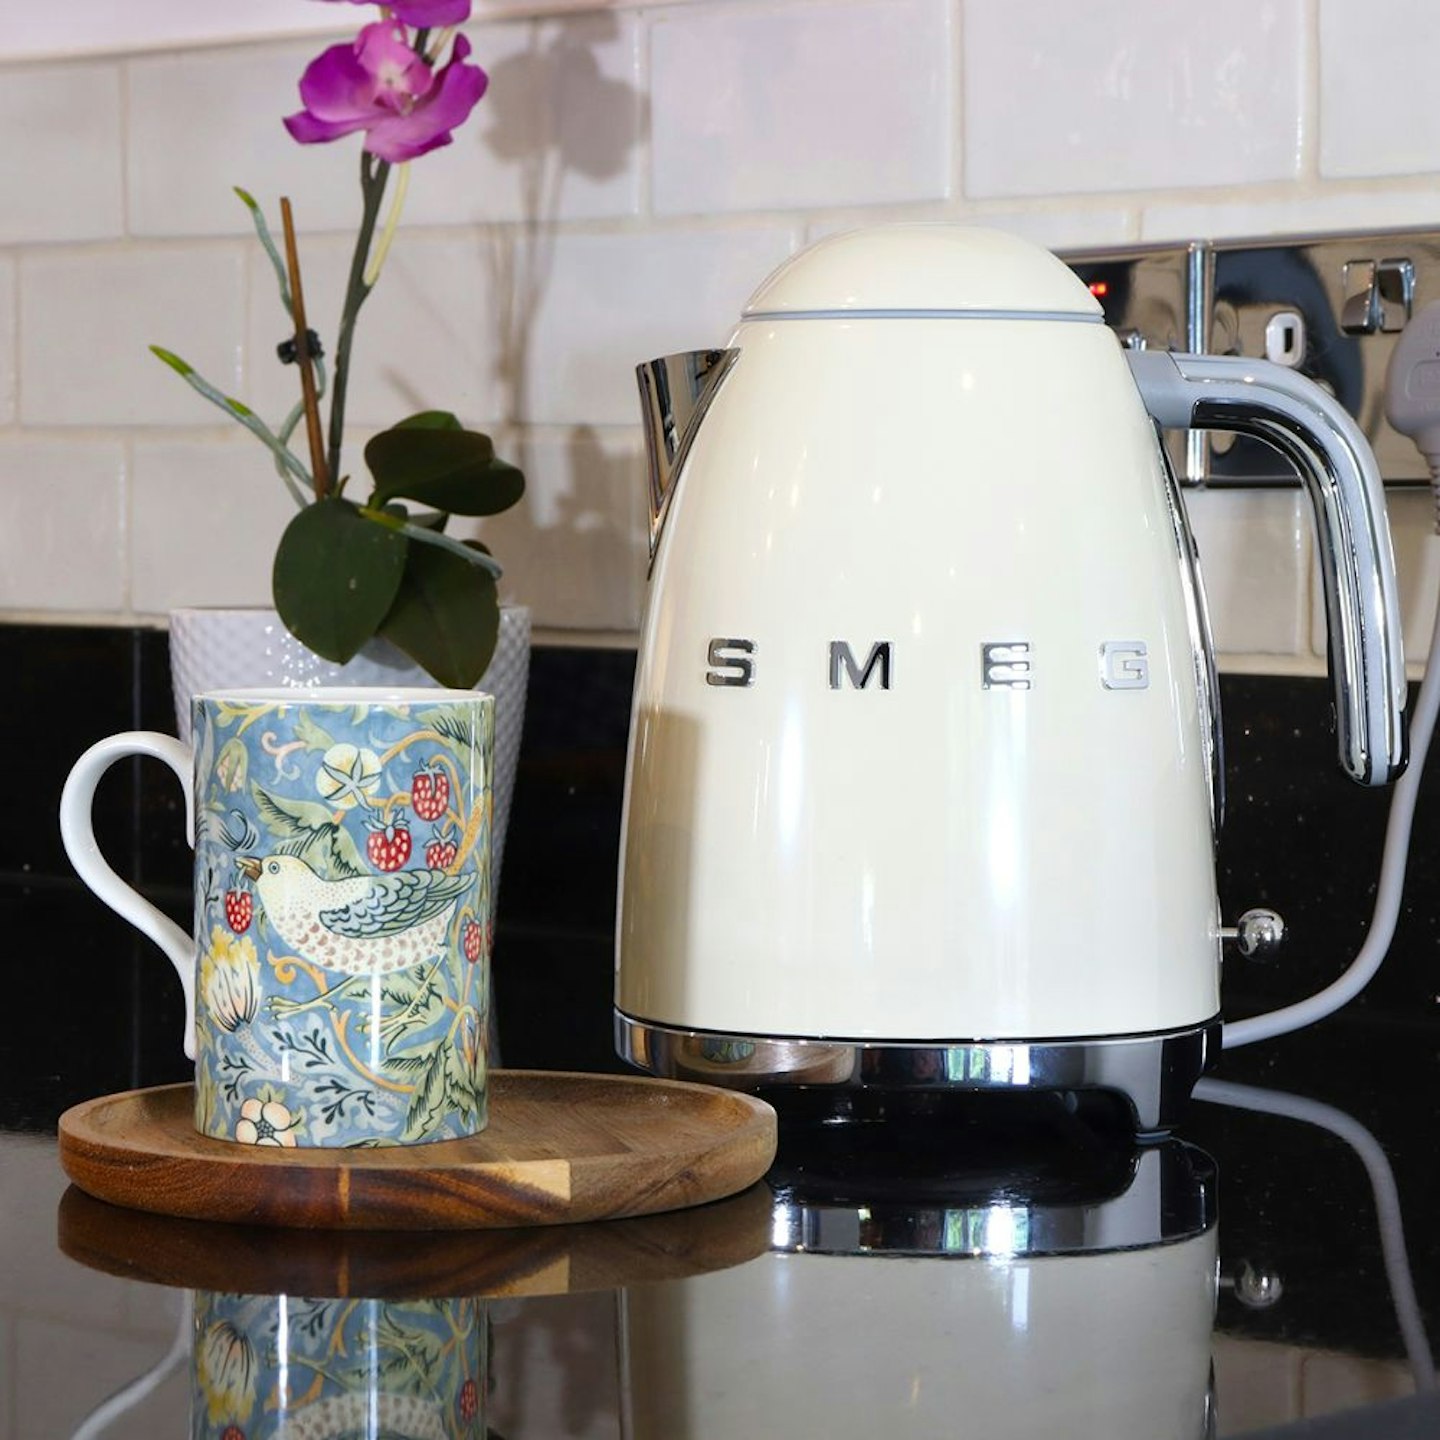 A Smeg 50s Style Cream Cordless Electric Kettle on test